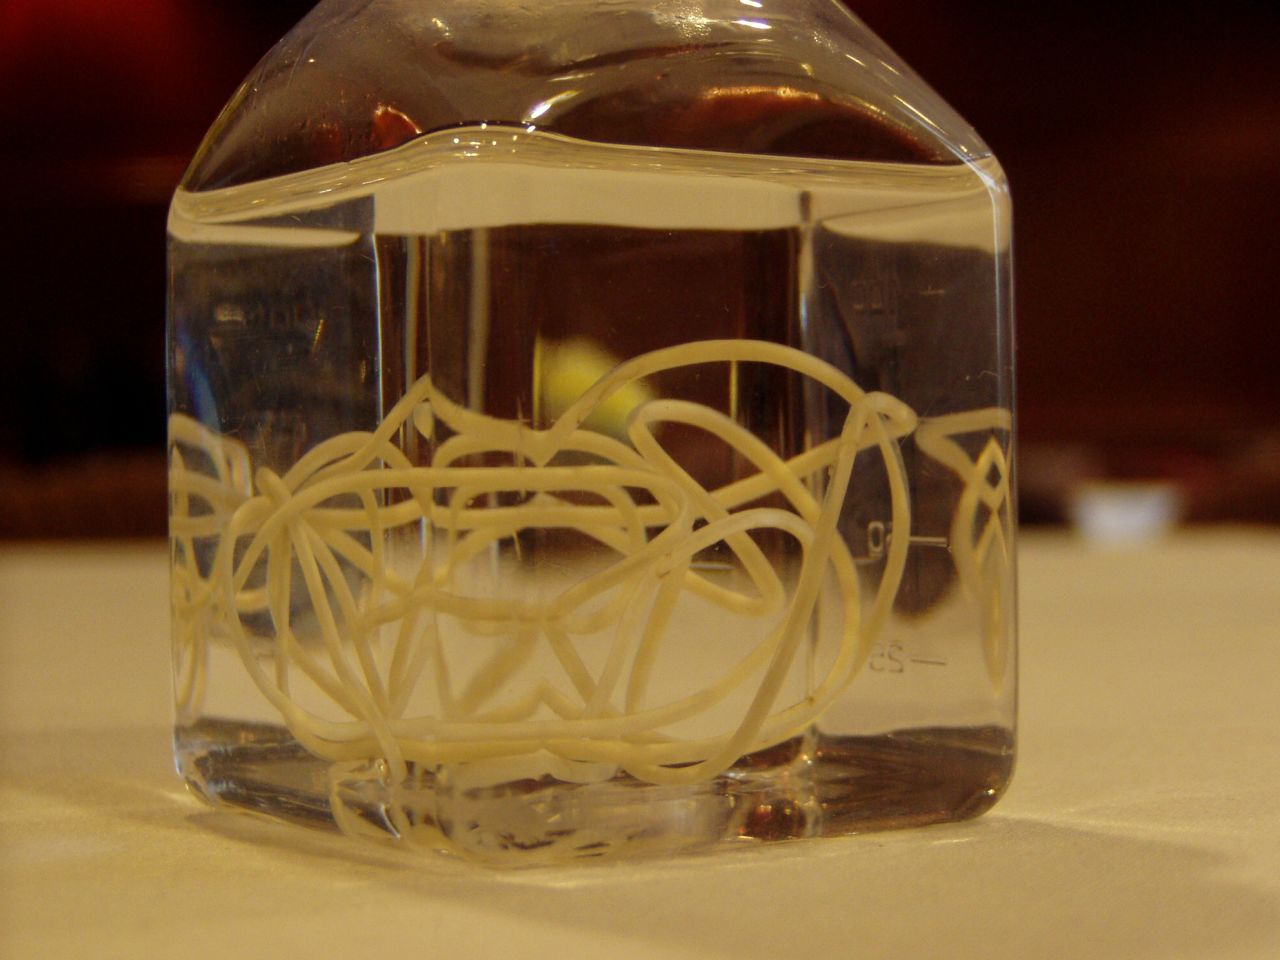 A Guinea worm preserved in alcohol. Adult female worms can grow up to 3 feet long.